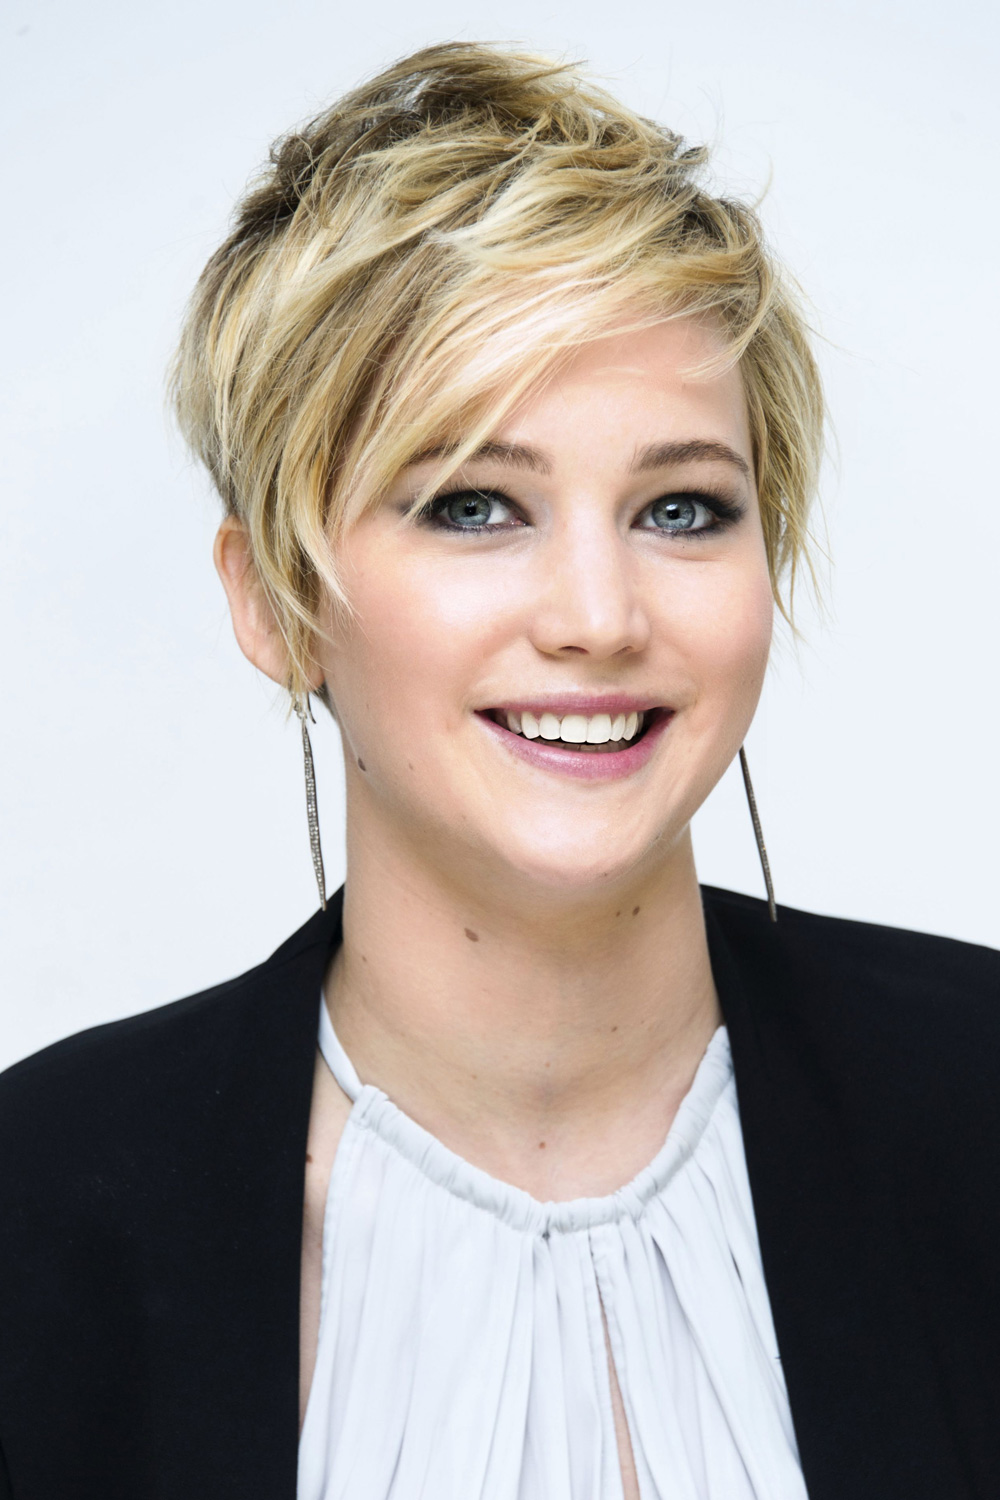 Short Hairstyles Hair And Beauty Galleries Marie Claire